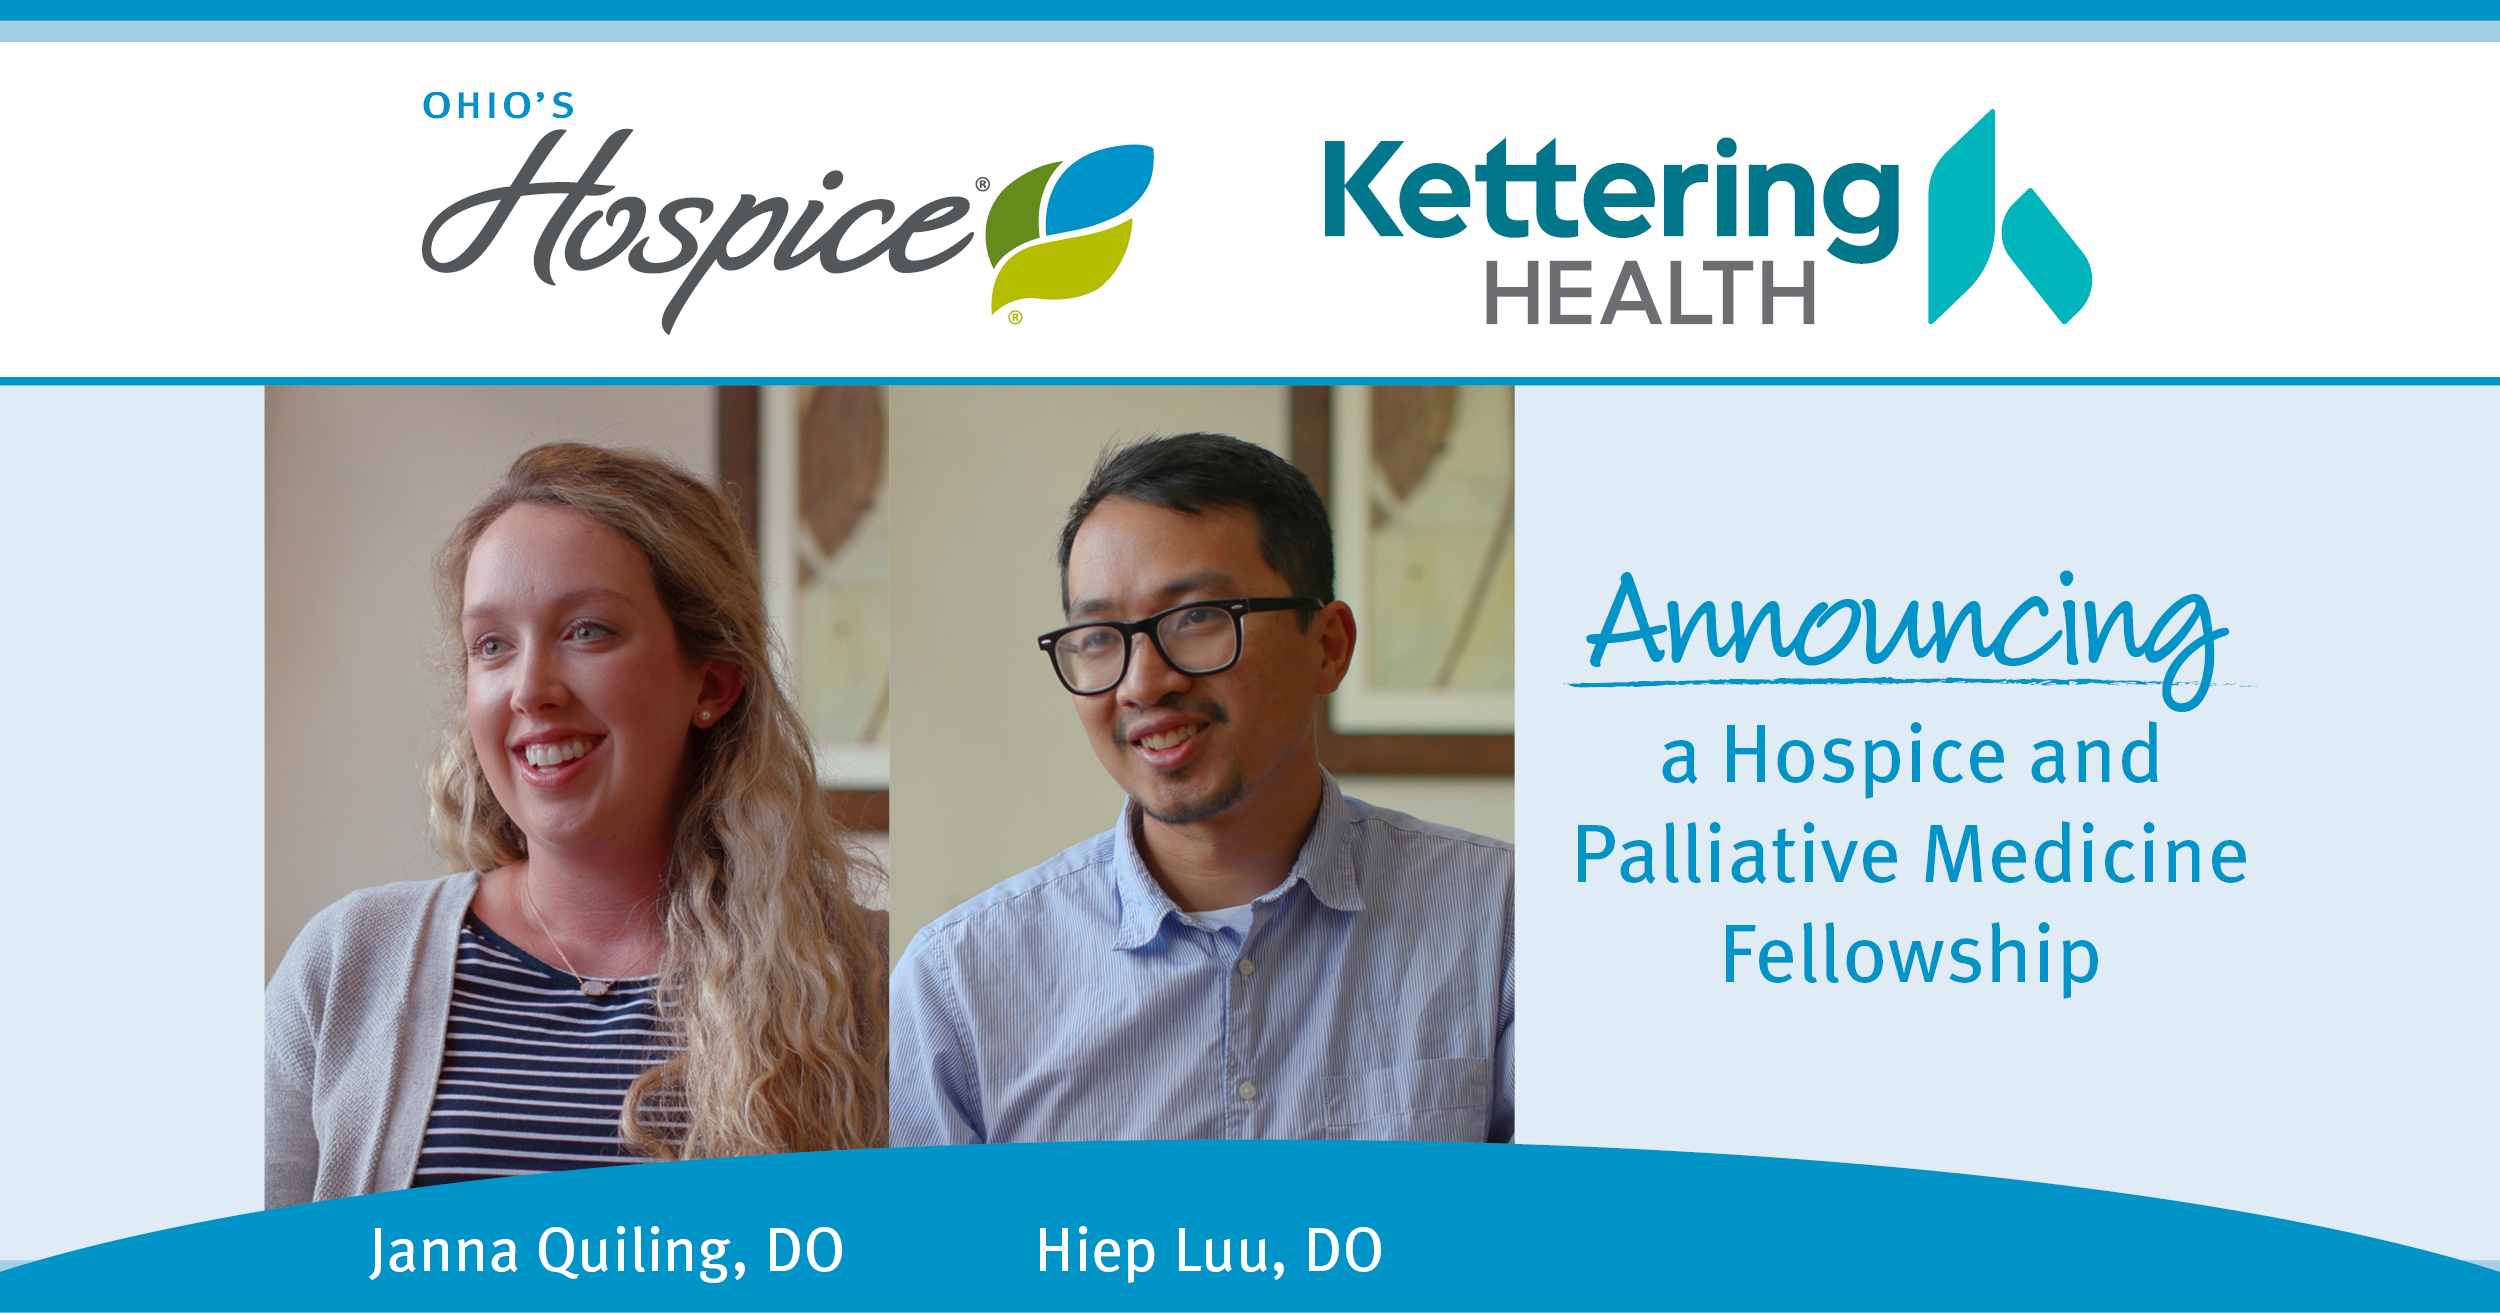 Ohio’s Hospice and Kettering Health Announce Hospice and Palliative Medicine Fellowship